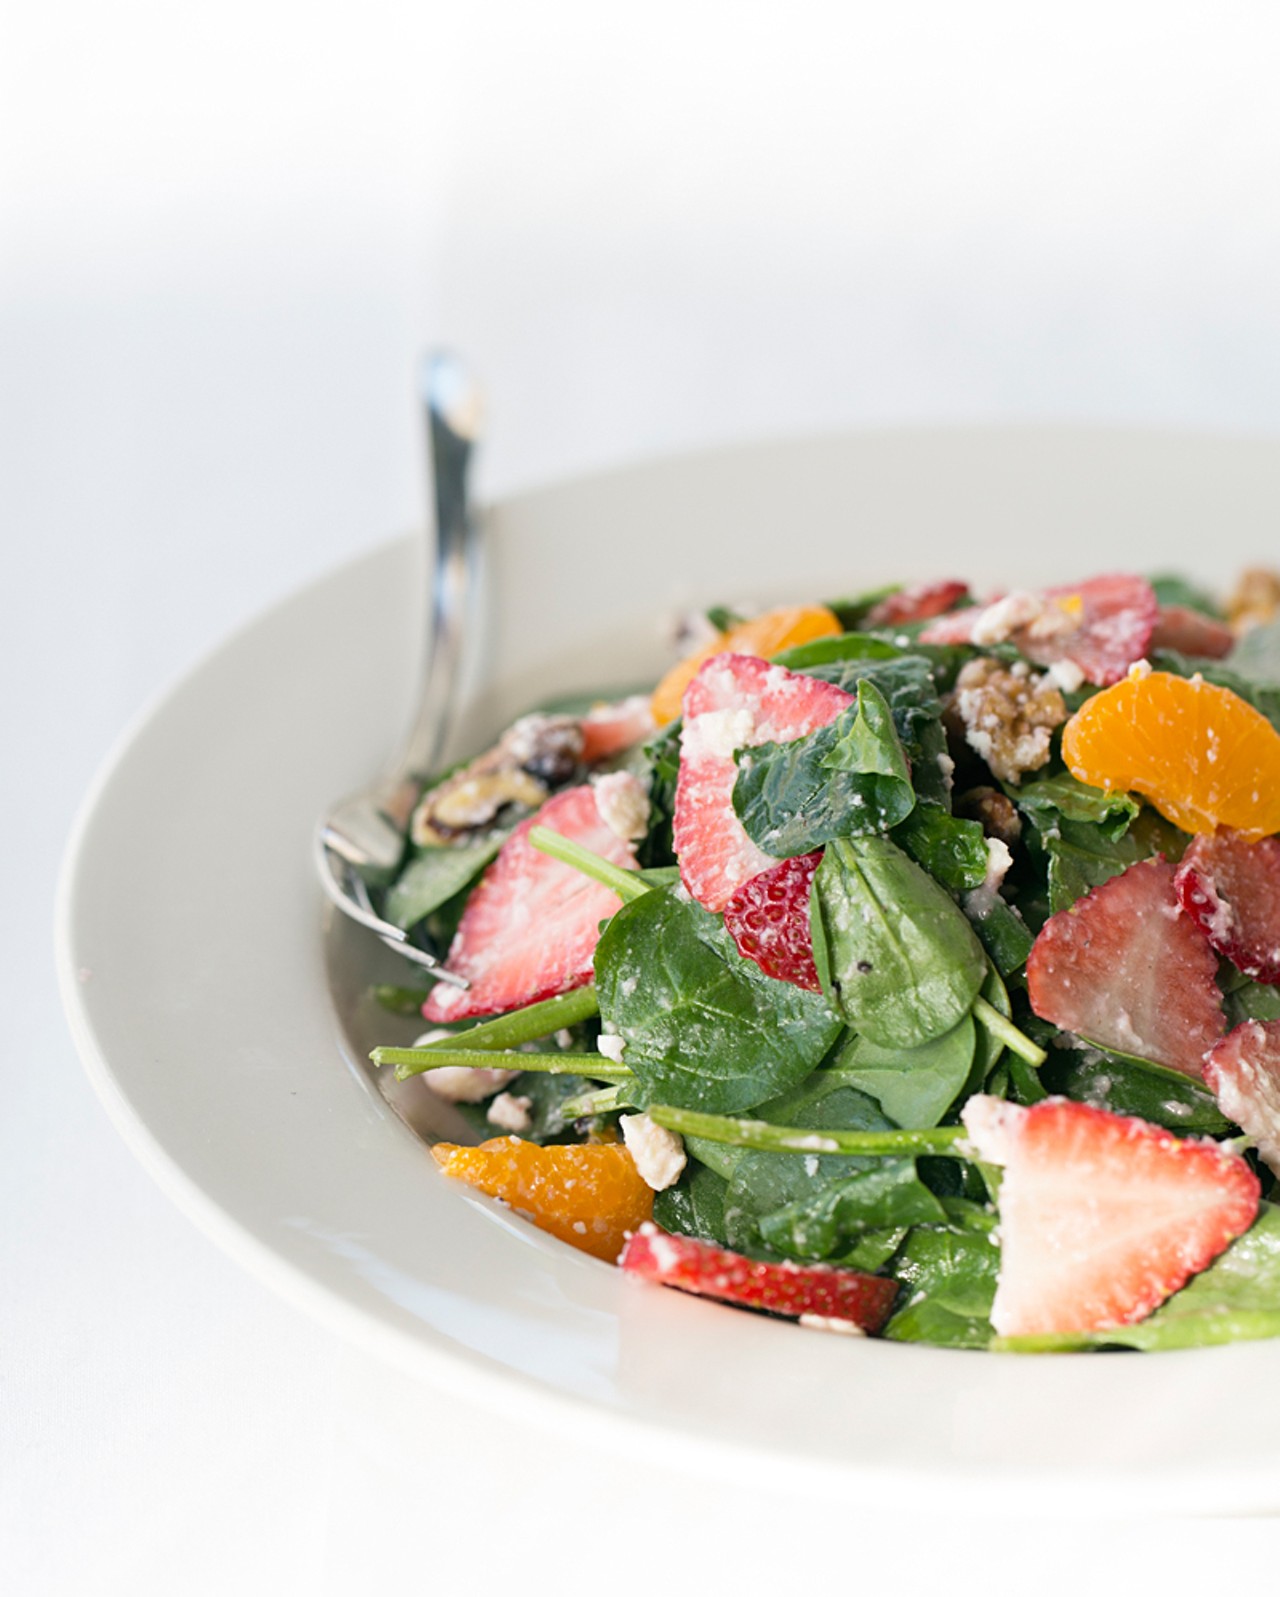 The "Cafe Orleans" salad is made with baby spinach, strawberry, madarin orange, black walnut, crumbled feta and red-onion dressing.